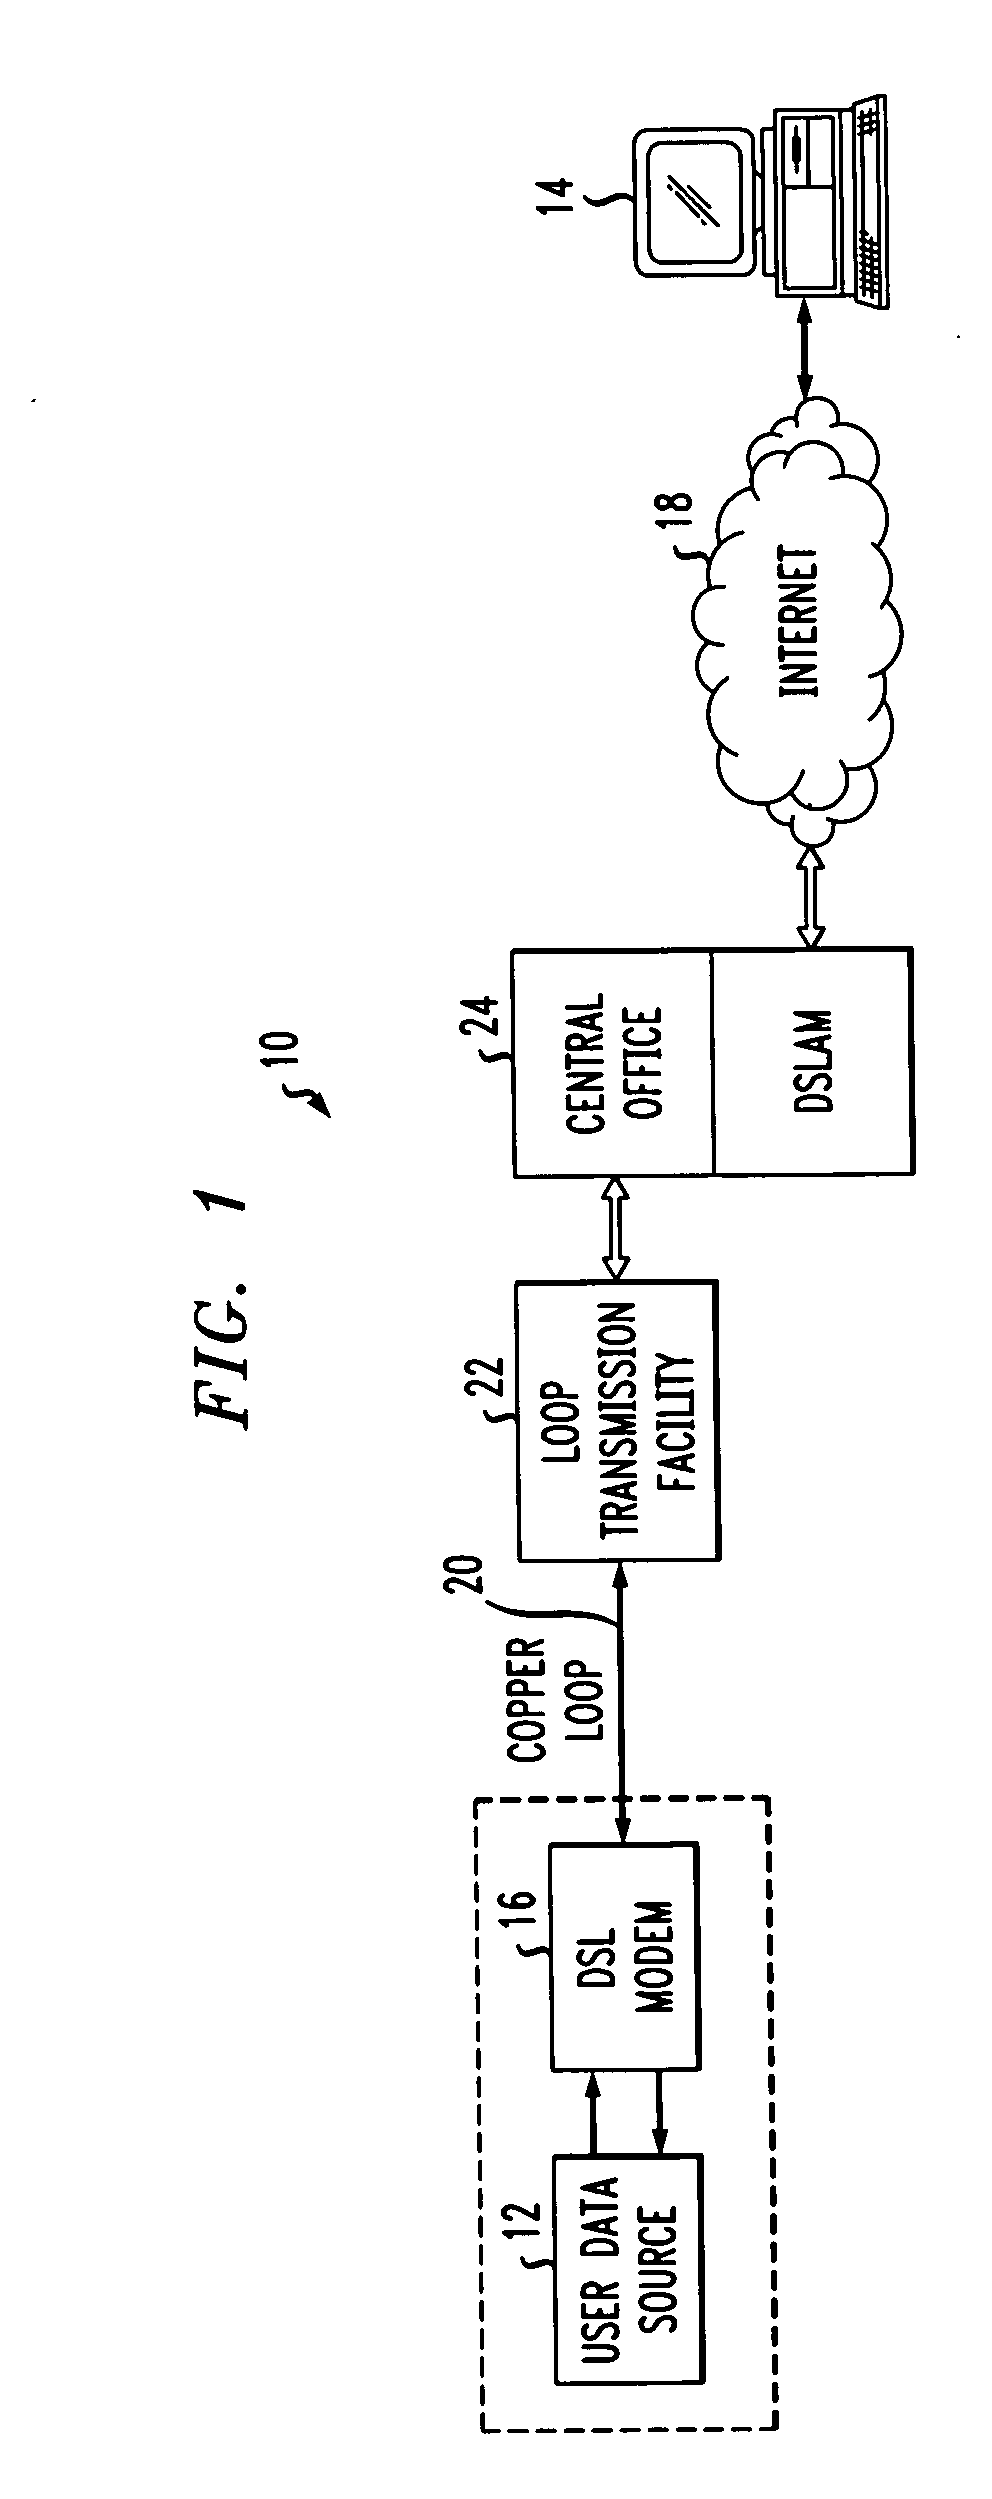 Multi-frequency data transmission channel power allocation